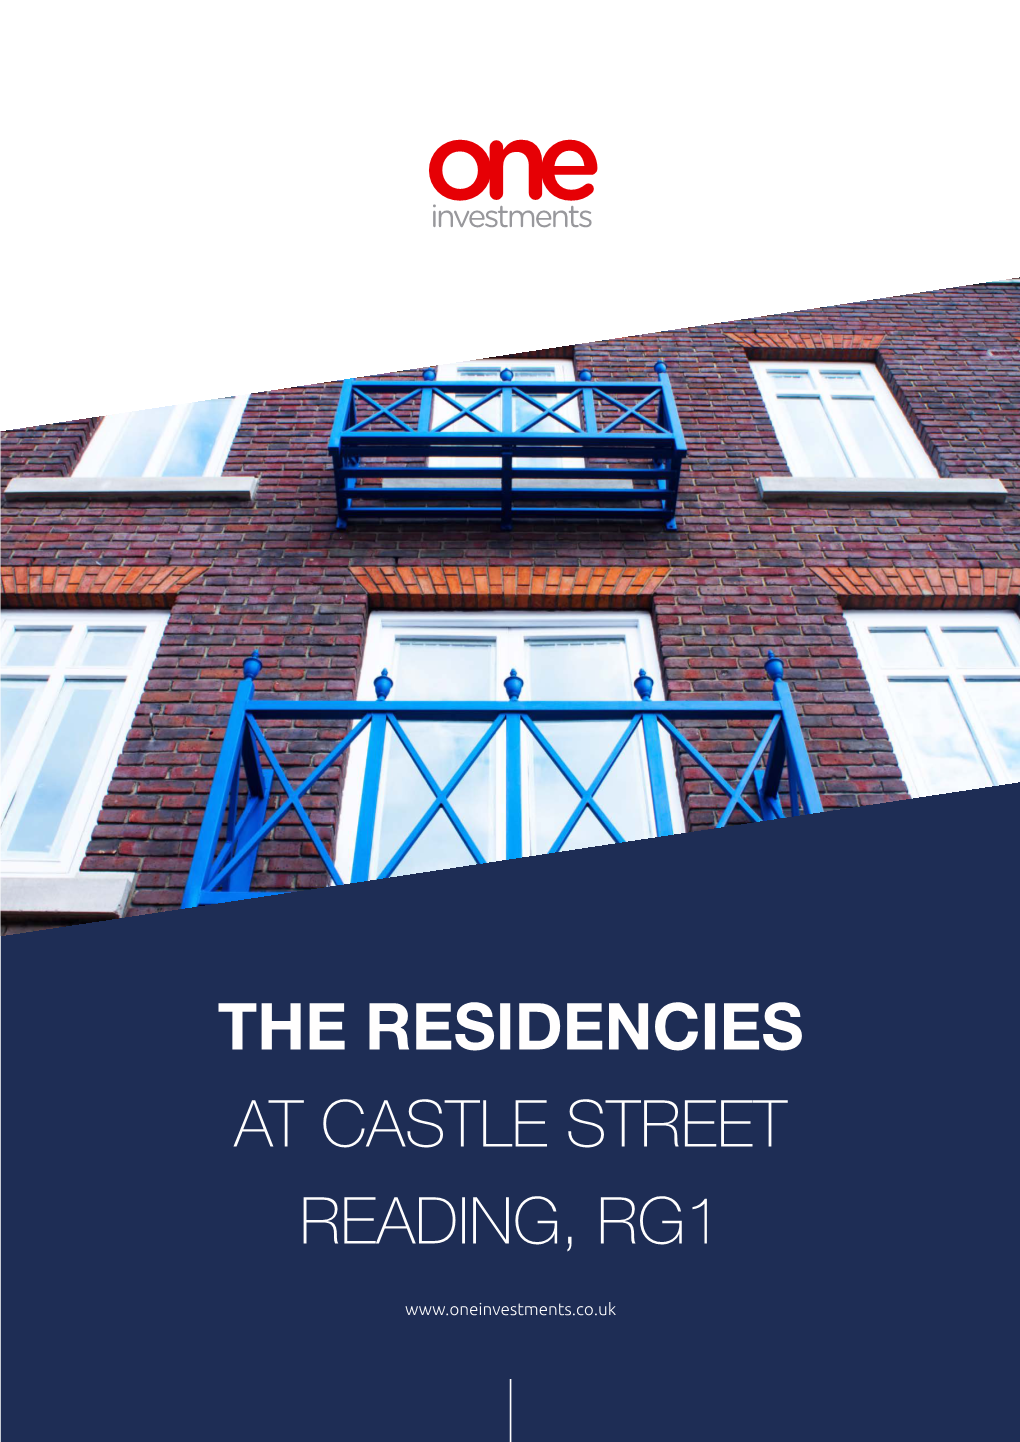 The Residencies at Castle Street Reading, Rg1